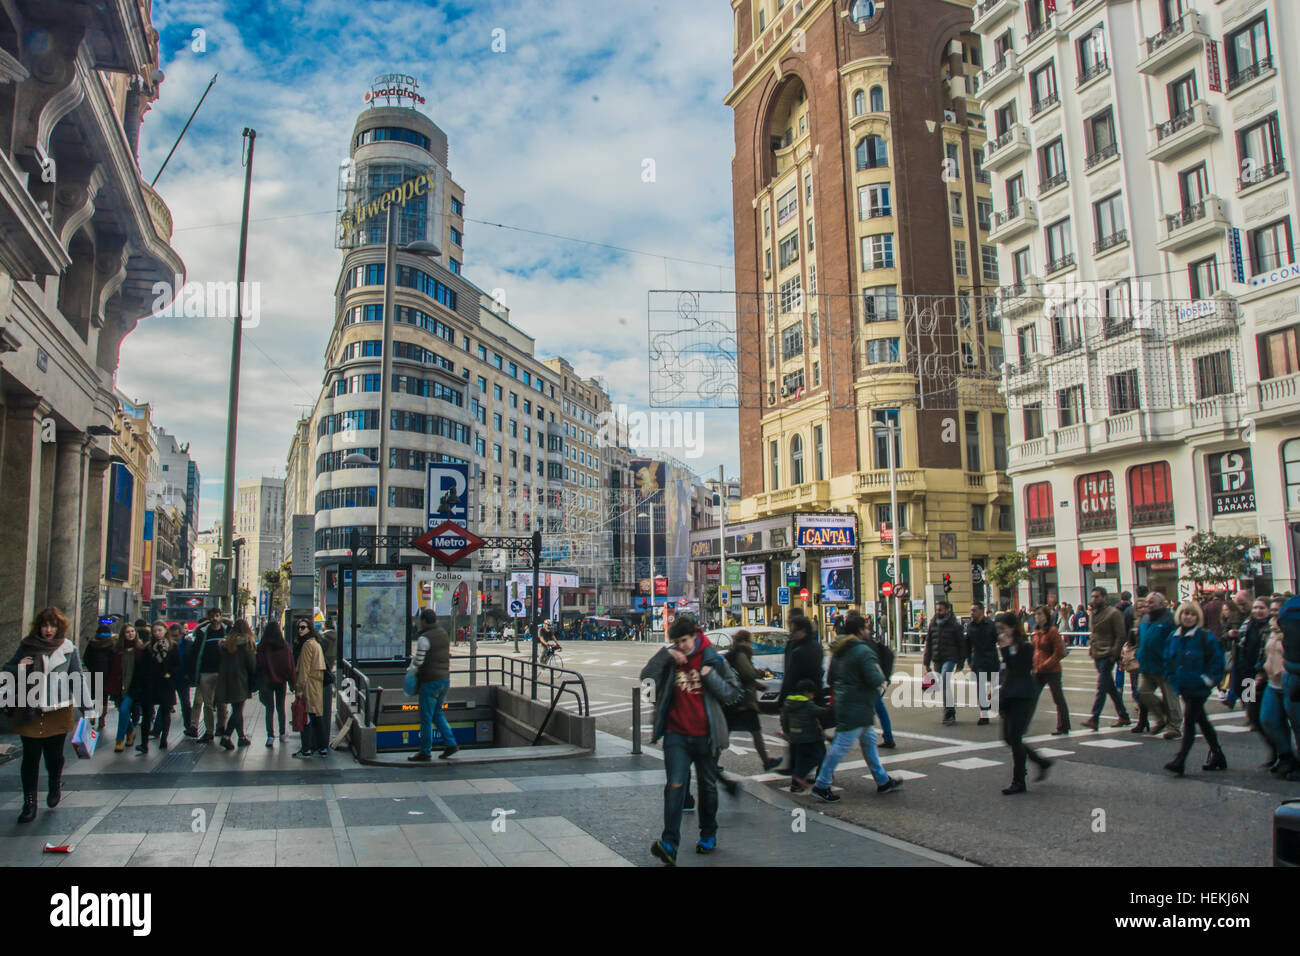 the city council of Madrid decides to reduce two lanes for vehicles in Gran Via avenue, right now it is permit to circulate bicycles, motorbikes, buses, private cars wit zero emissions, taxi residents, and package vehicle companies. The pavement right now is extended through installed fences on the road. Stock Photo